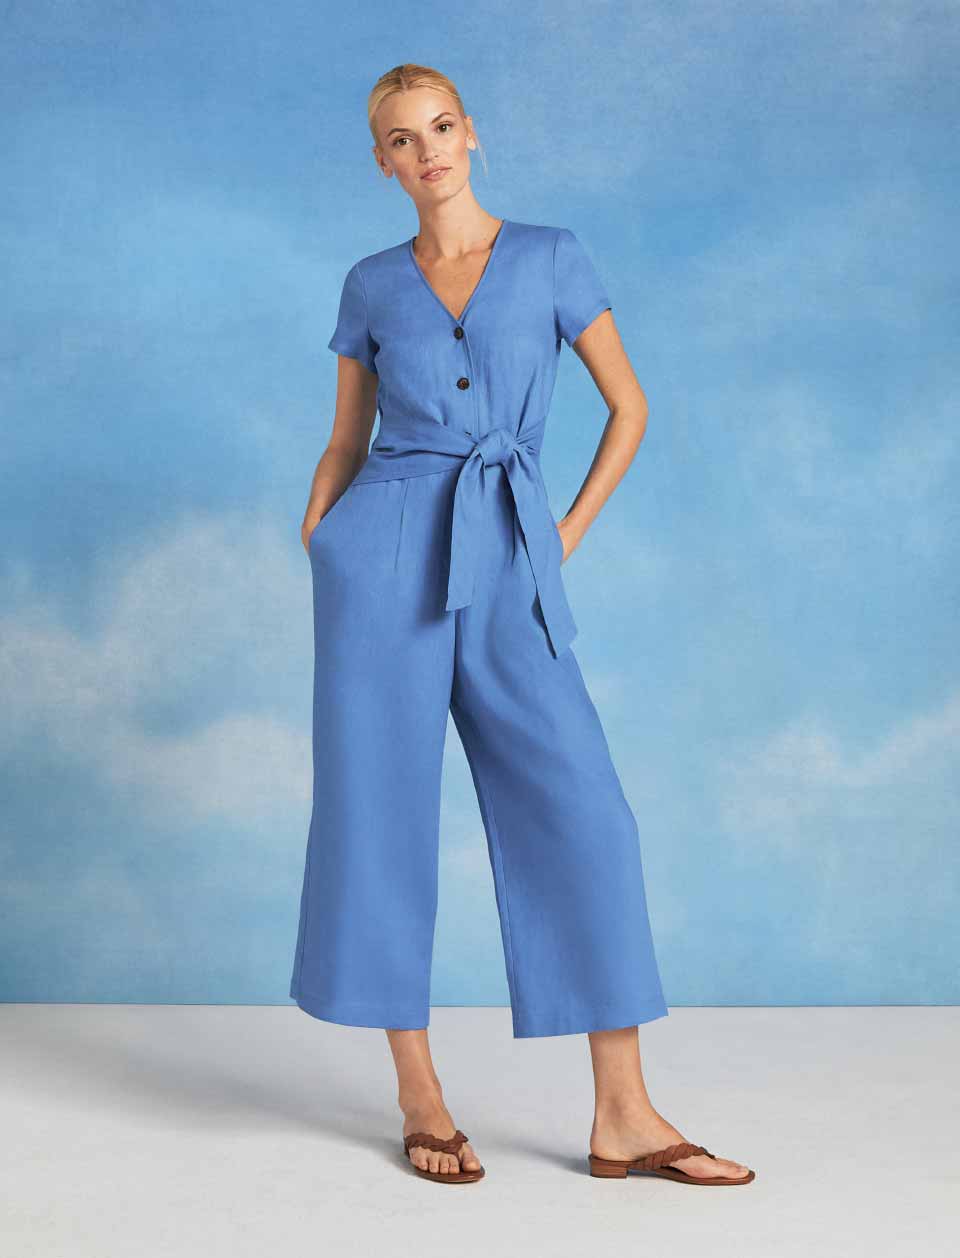 Model photographed in front of a sky blue background wearing a linen jumpsuit.